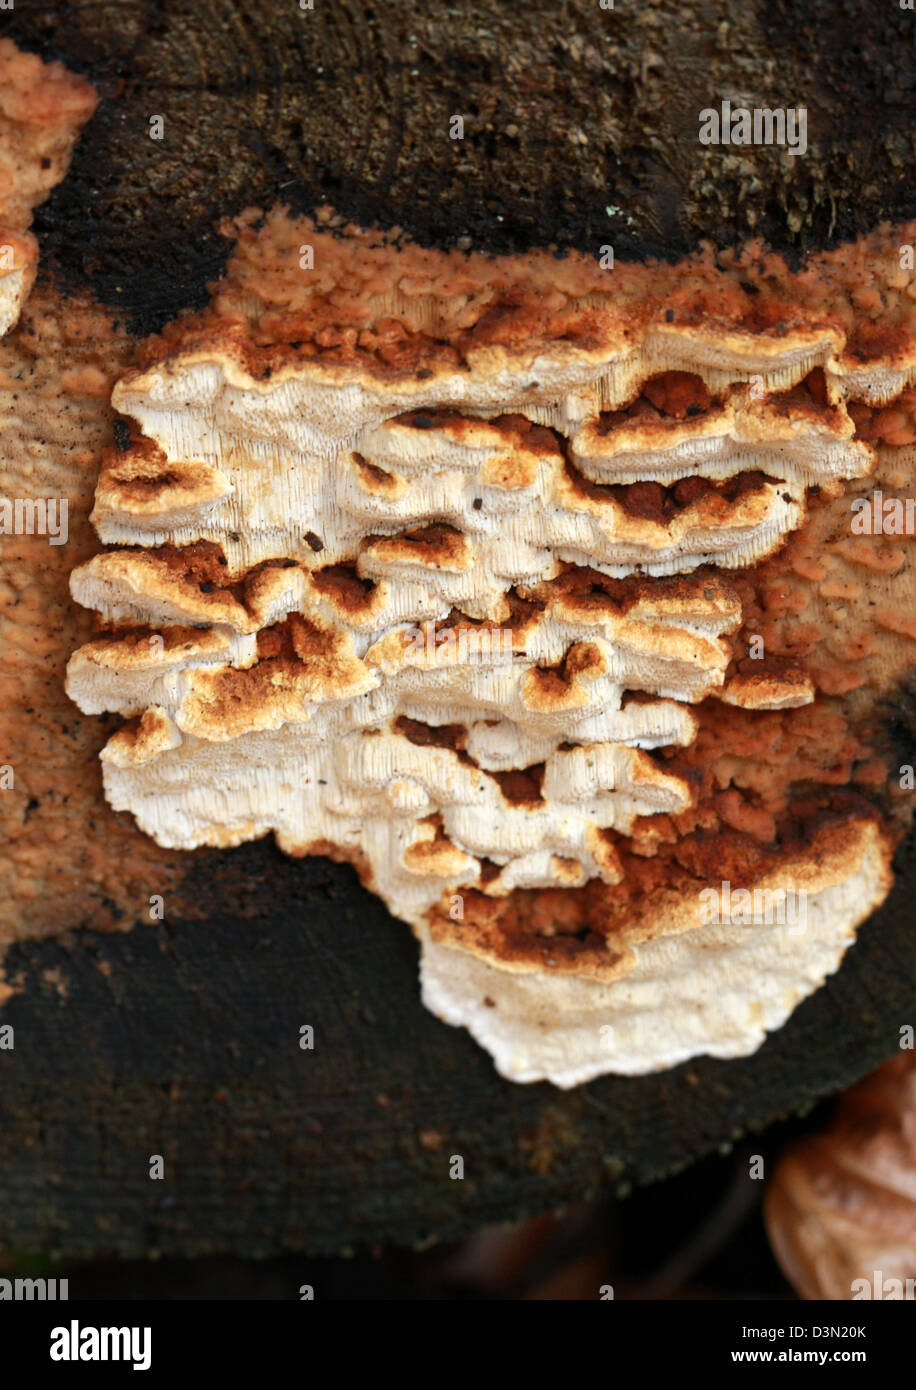 Root Rot, Root Fomes, Heterobasidion annosum (Fomes annosus), Bondarzewiaceae. Growing on a Recently Felled Conifer Tree. Stock Photo